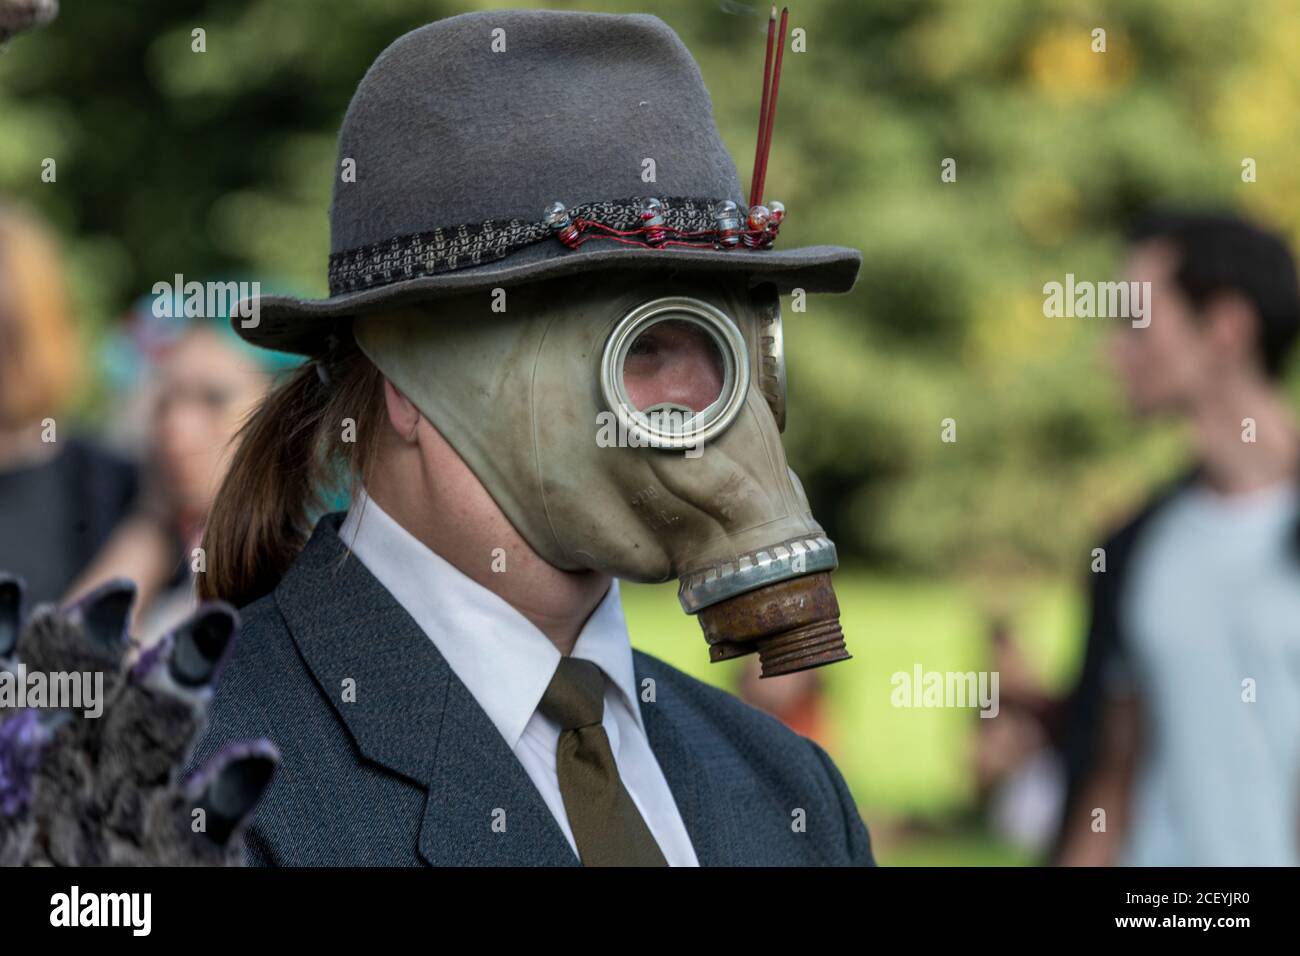 Wearing Gas Mask Funny High Resolution Stock Photography and Images - Alamy